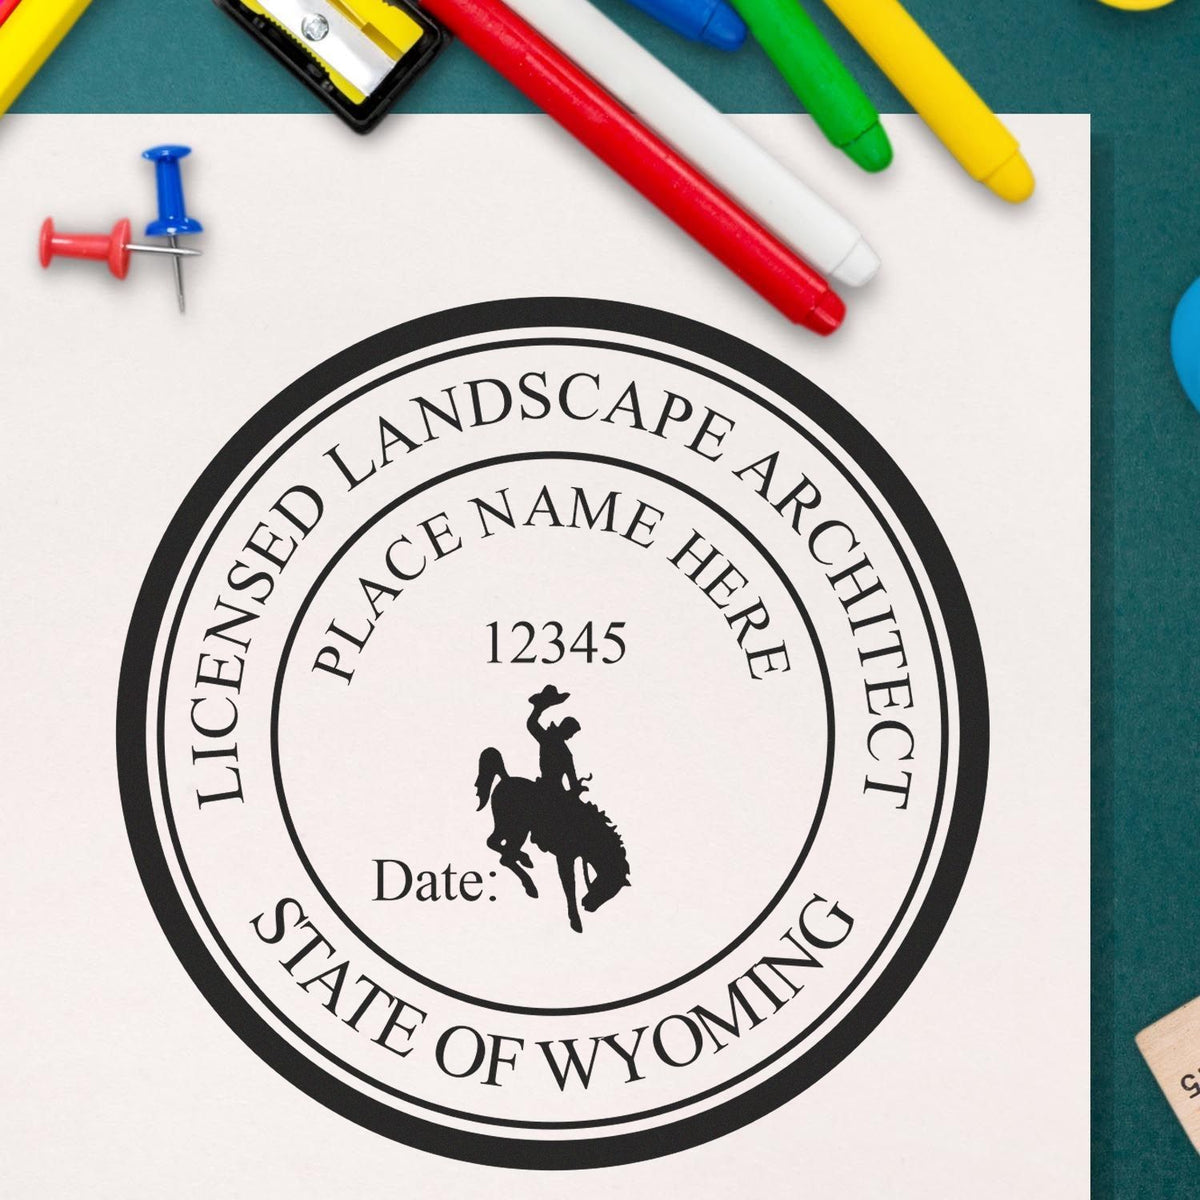 Slim Pre-Inked Wyoming Landscape Architect Seal Stamp in use photo showing a stamped imprint of the Slim Pre-Inked Wyoming Landscape Architect Seal Stamp